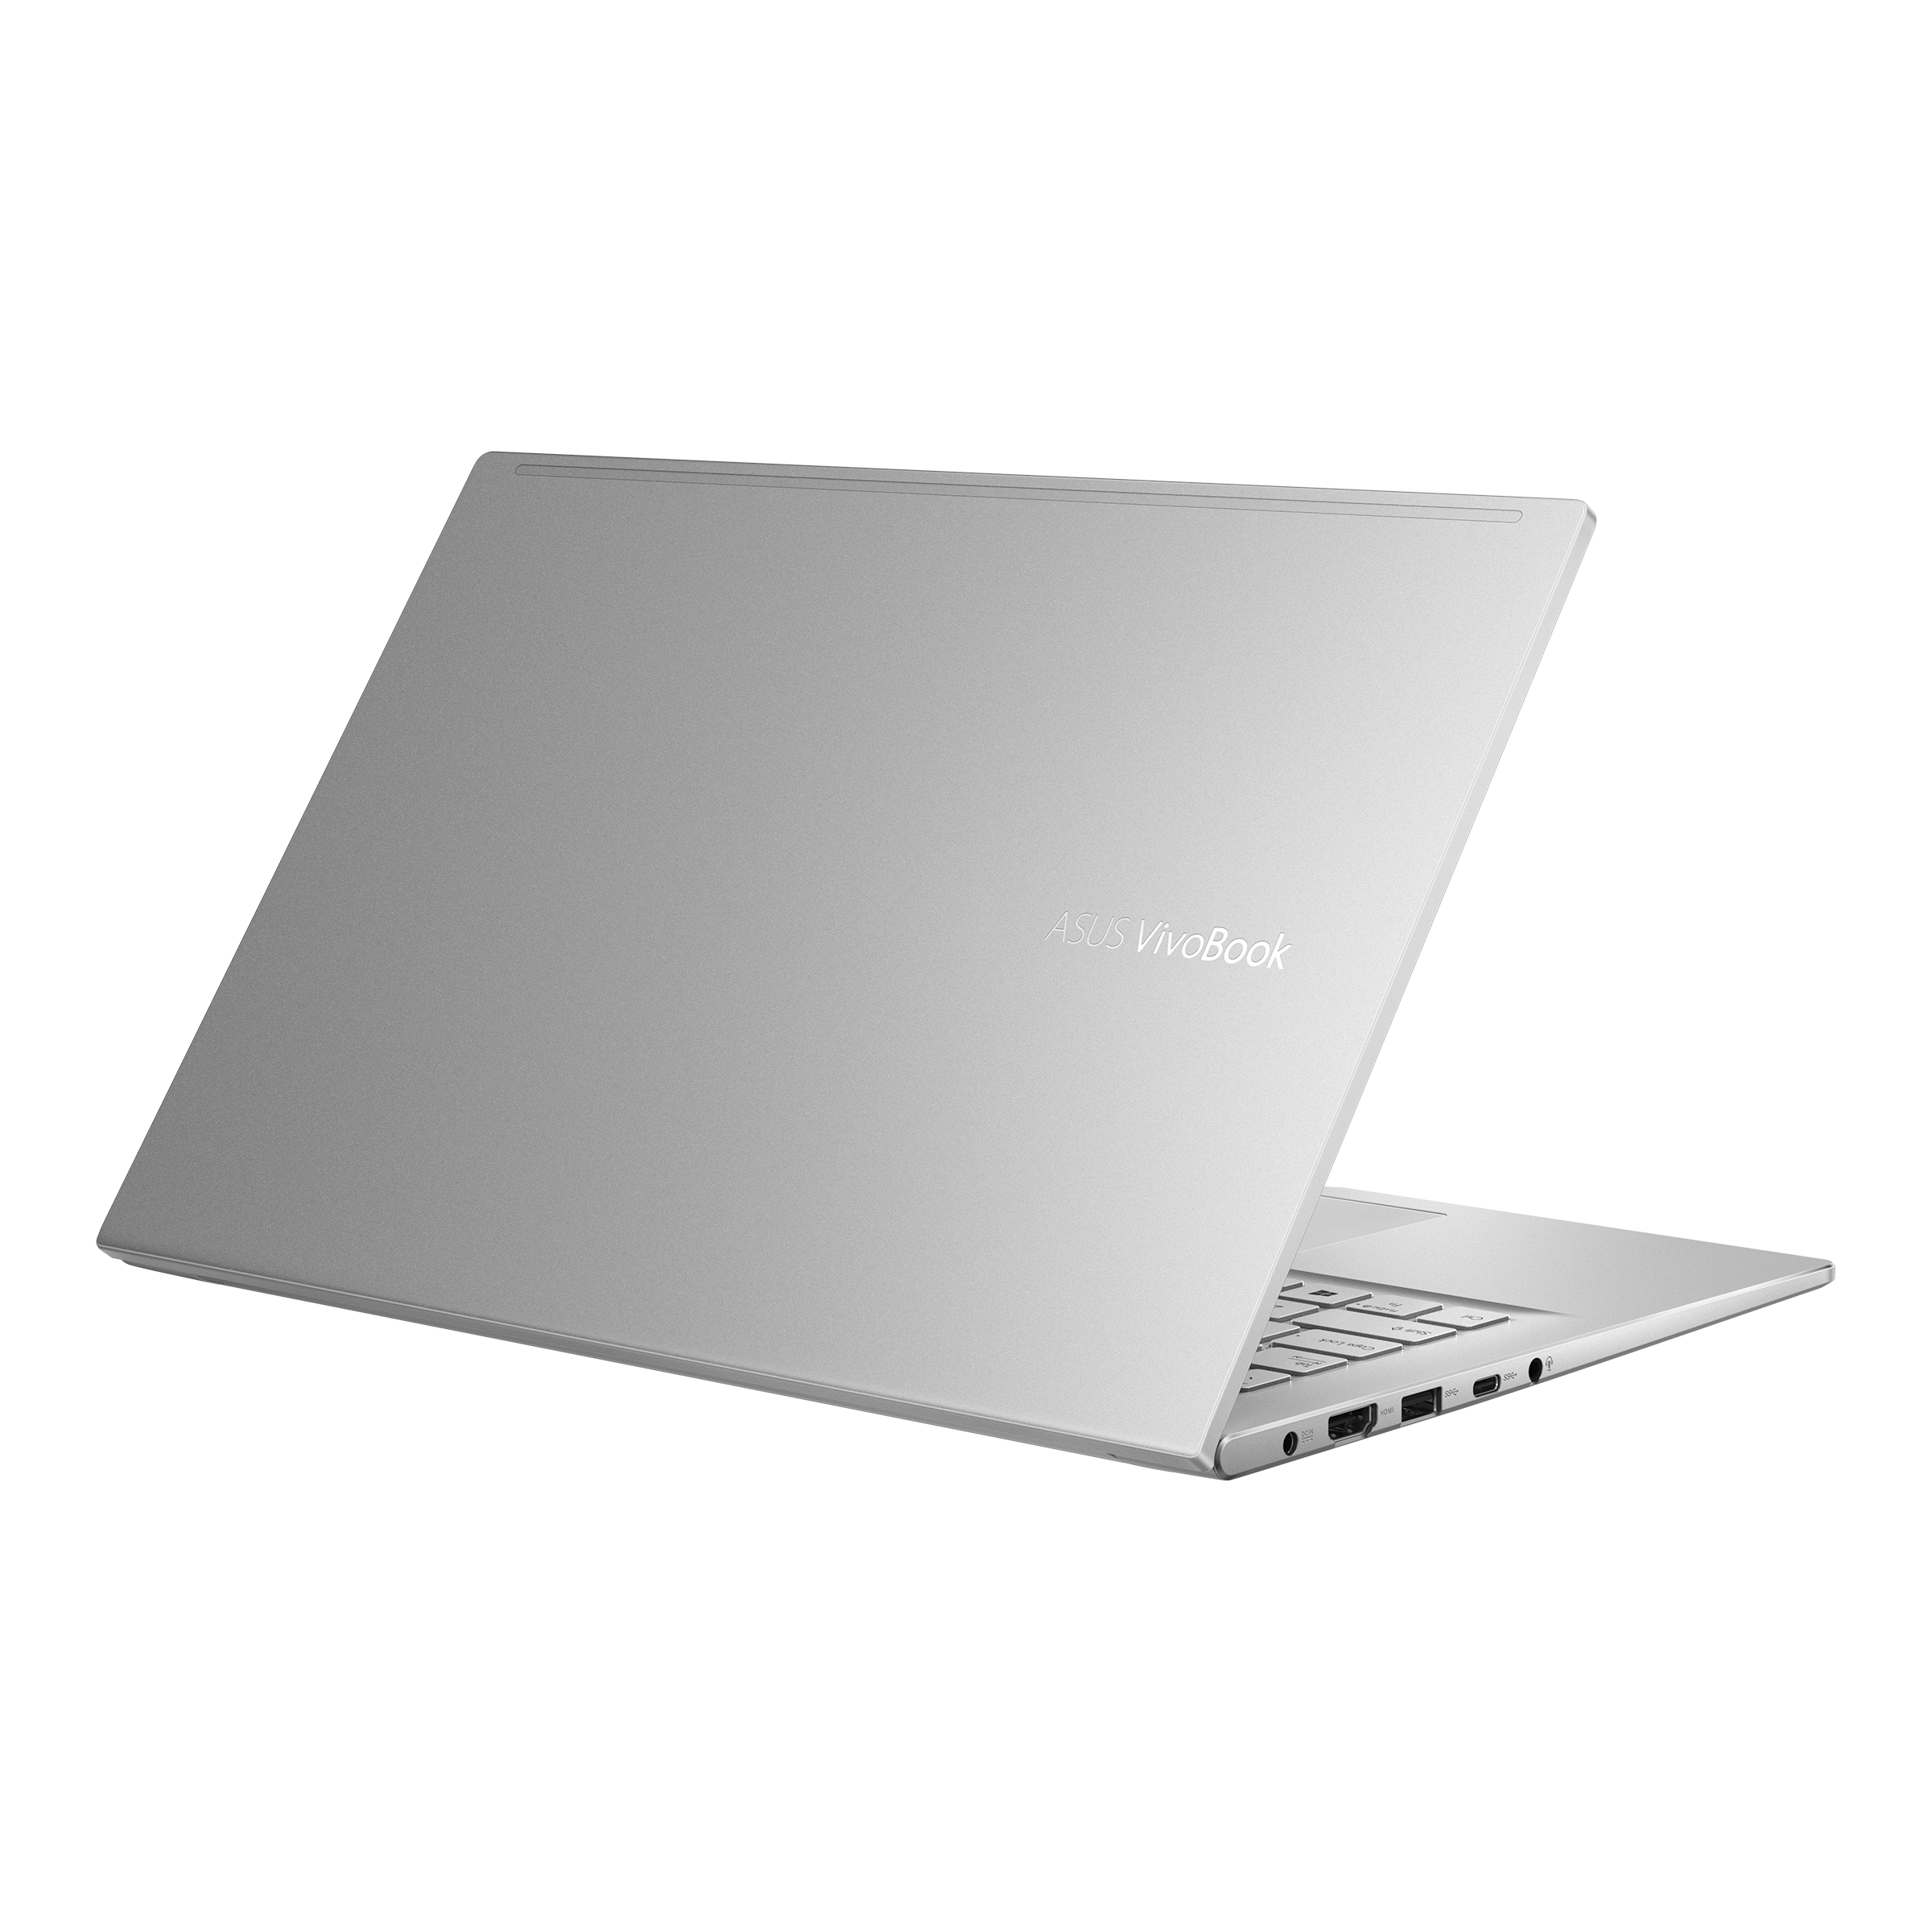 PC/タブレット ノートPC Vivobook 14 M413｜Laptops For Students｜ASUS USA